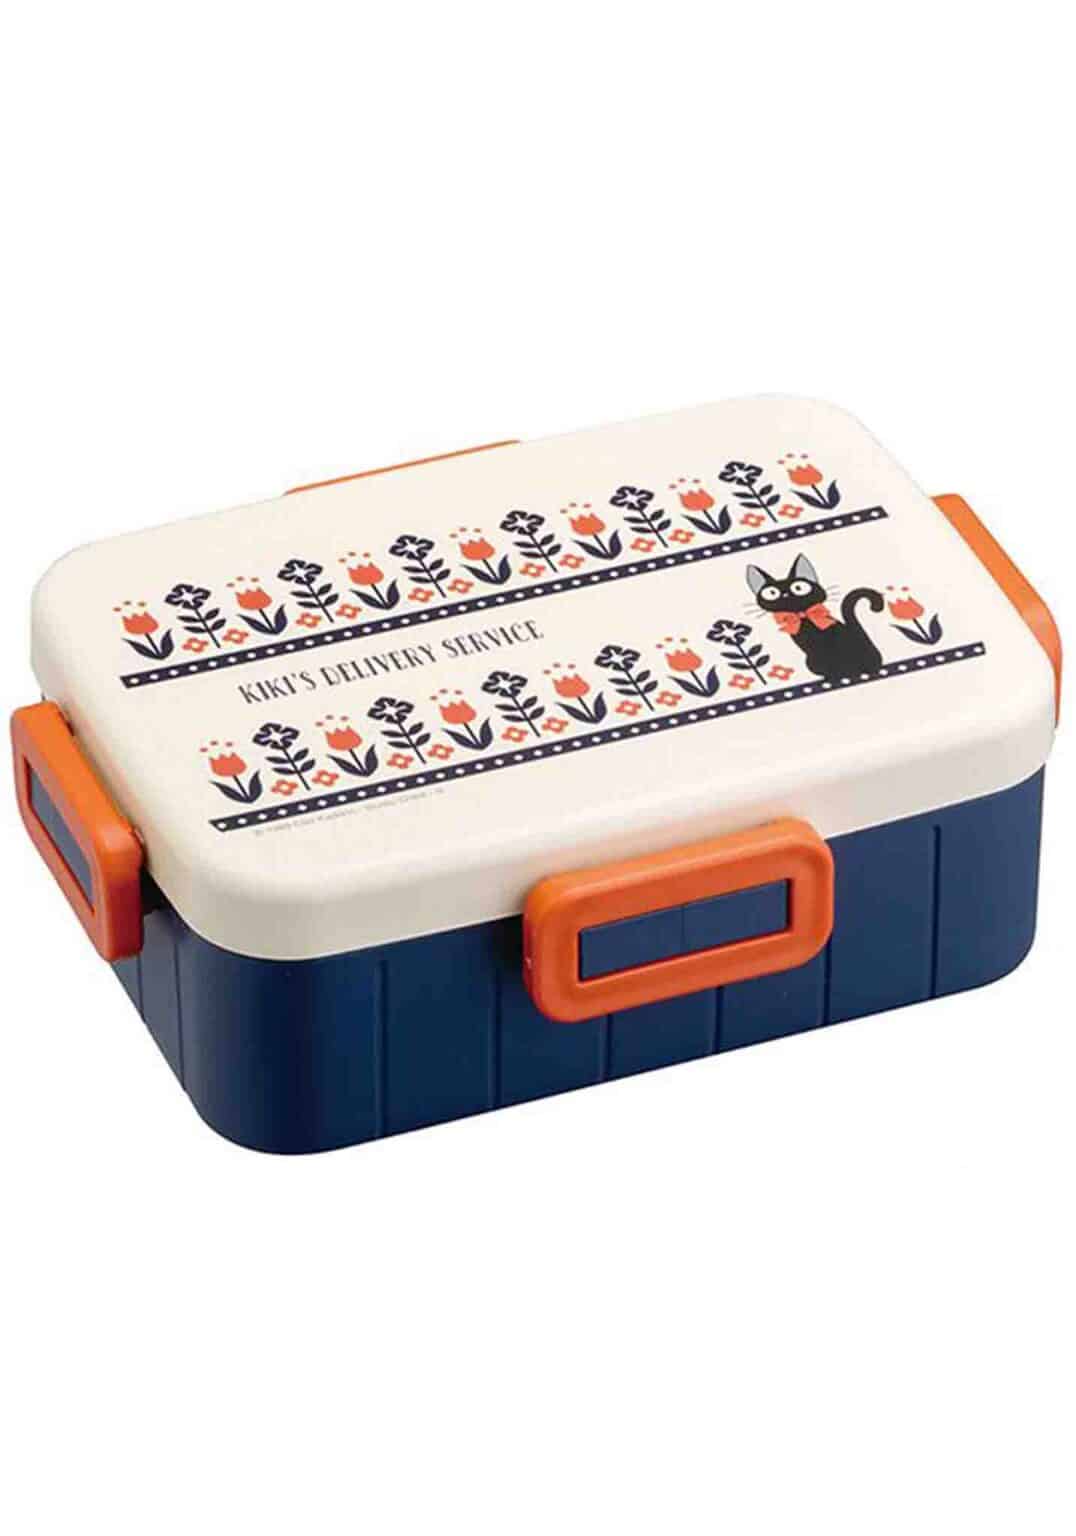 Clever Idiots Kiki's Delivery Service Modern Theme Bento Lunch Box Kawaii Gifts 4973307601521